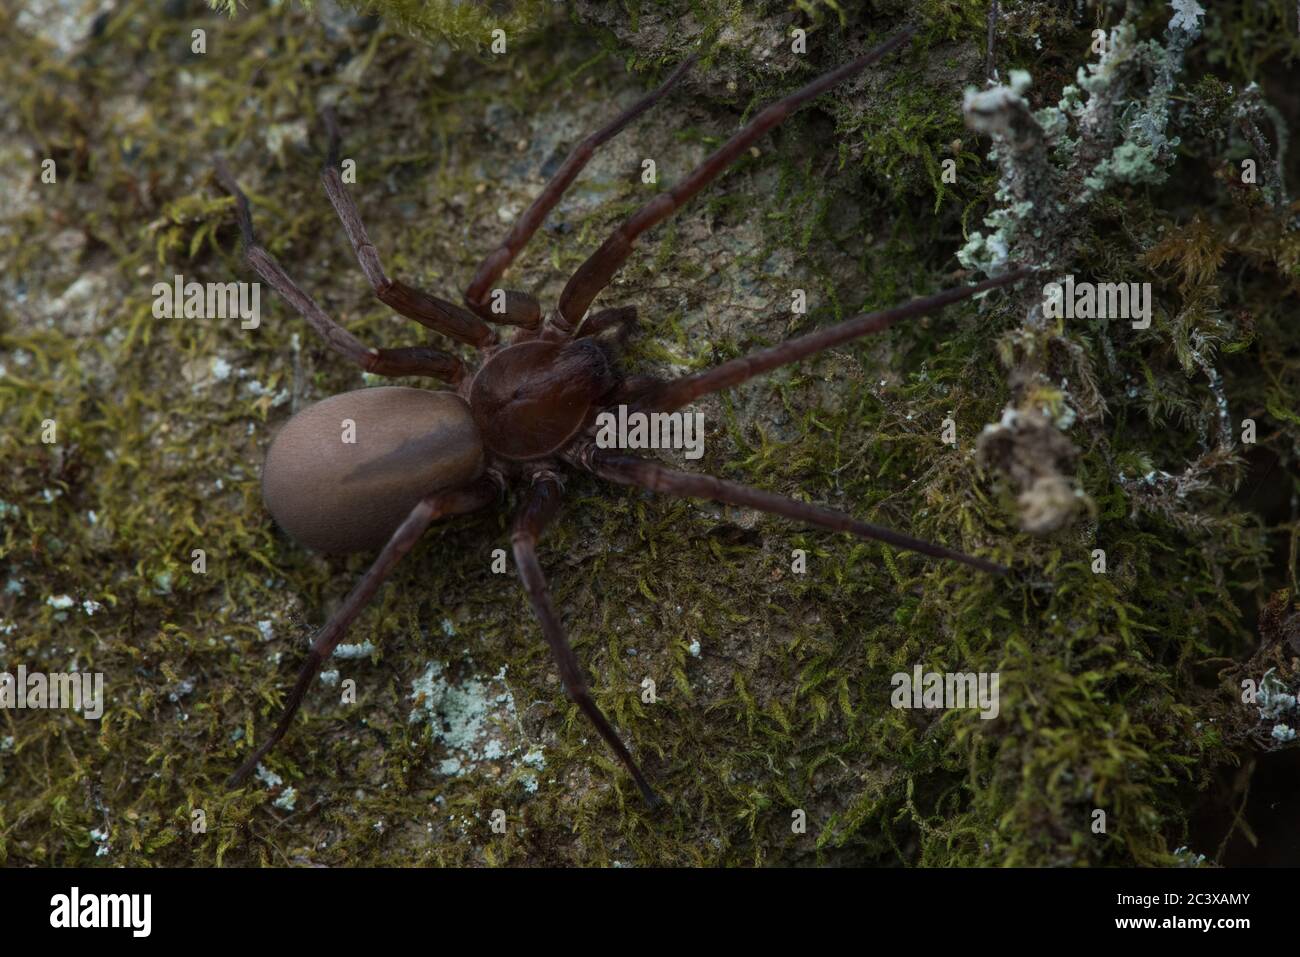 Titiotus species of spider found in California. These spiders are commonly known as false wolf spiders. Stock Photo